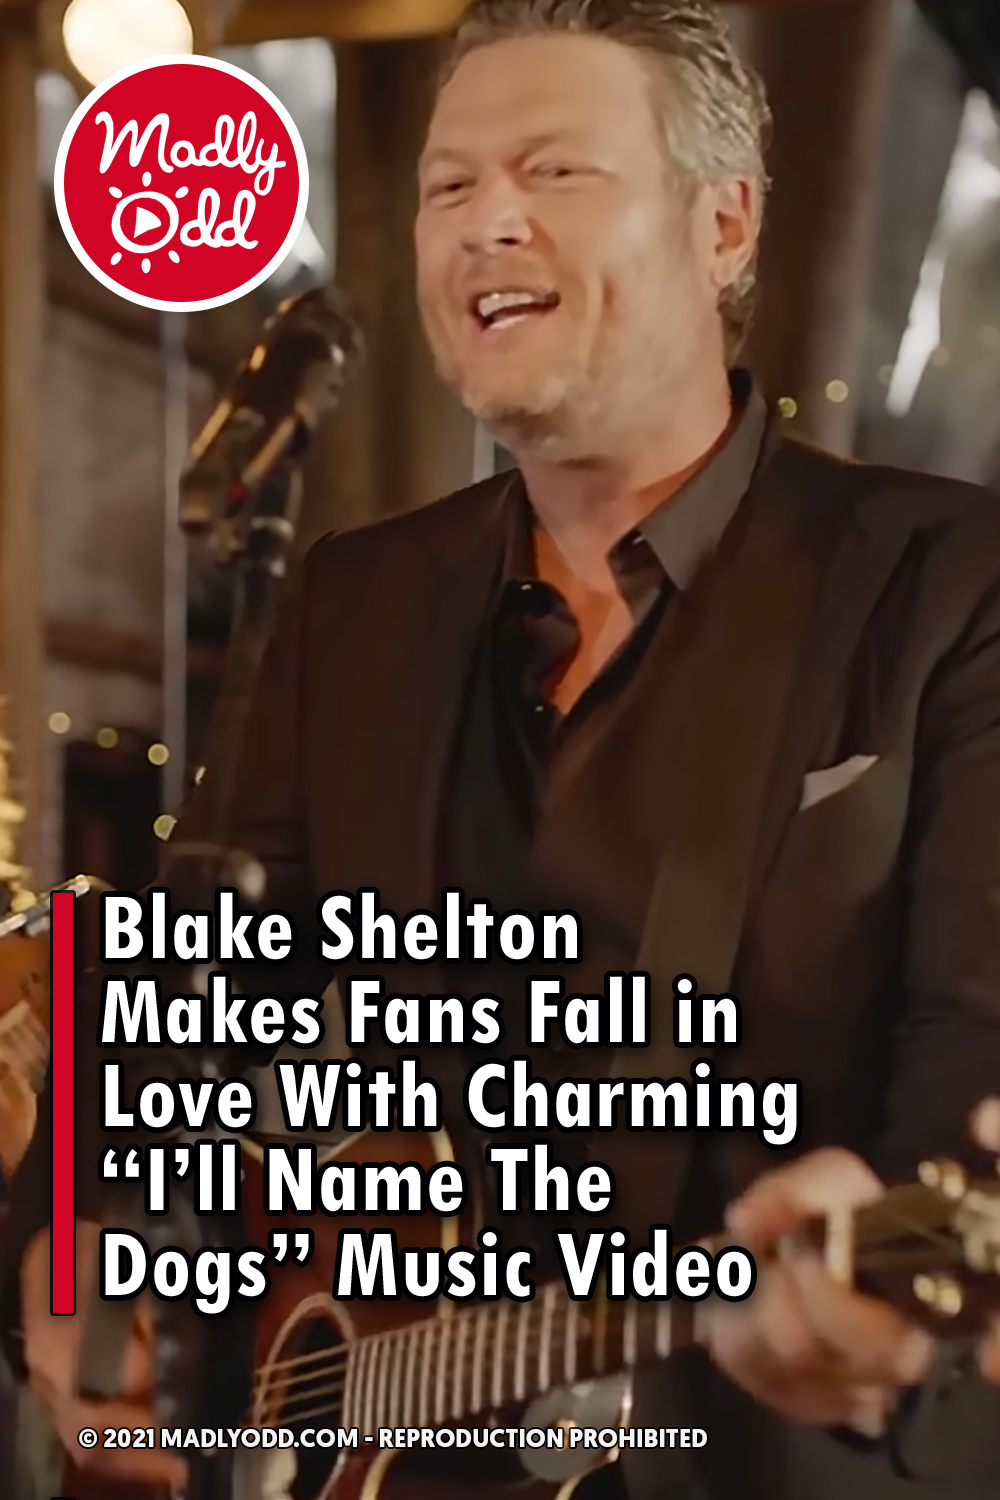 Blake Shelton Makes Fans Fall in Love With Charming \